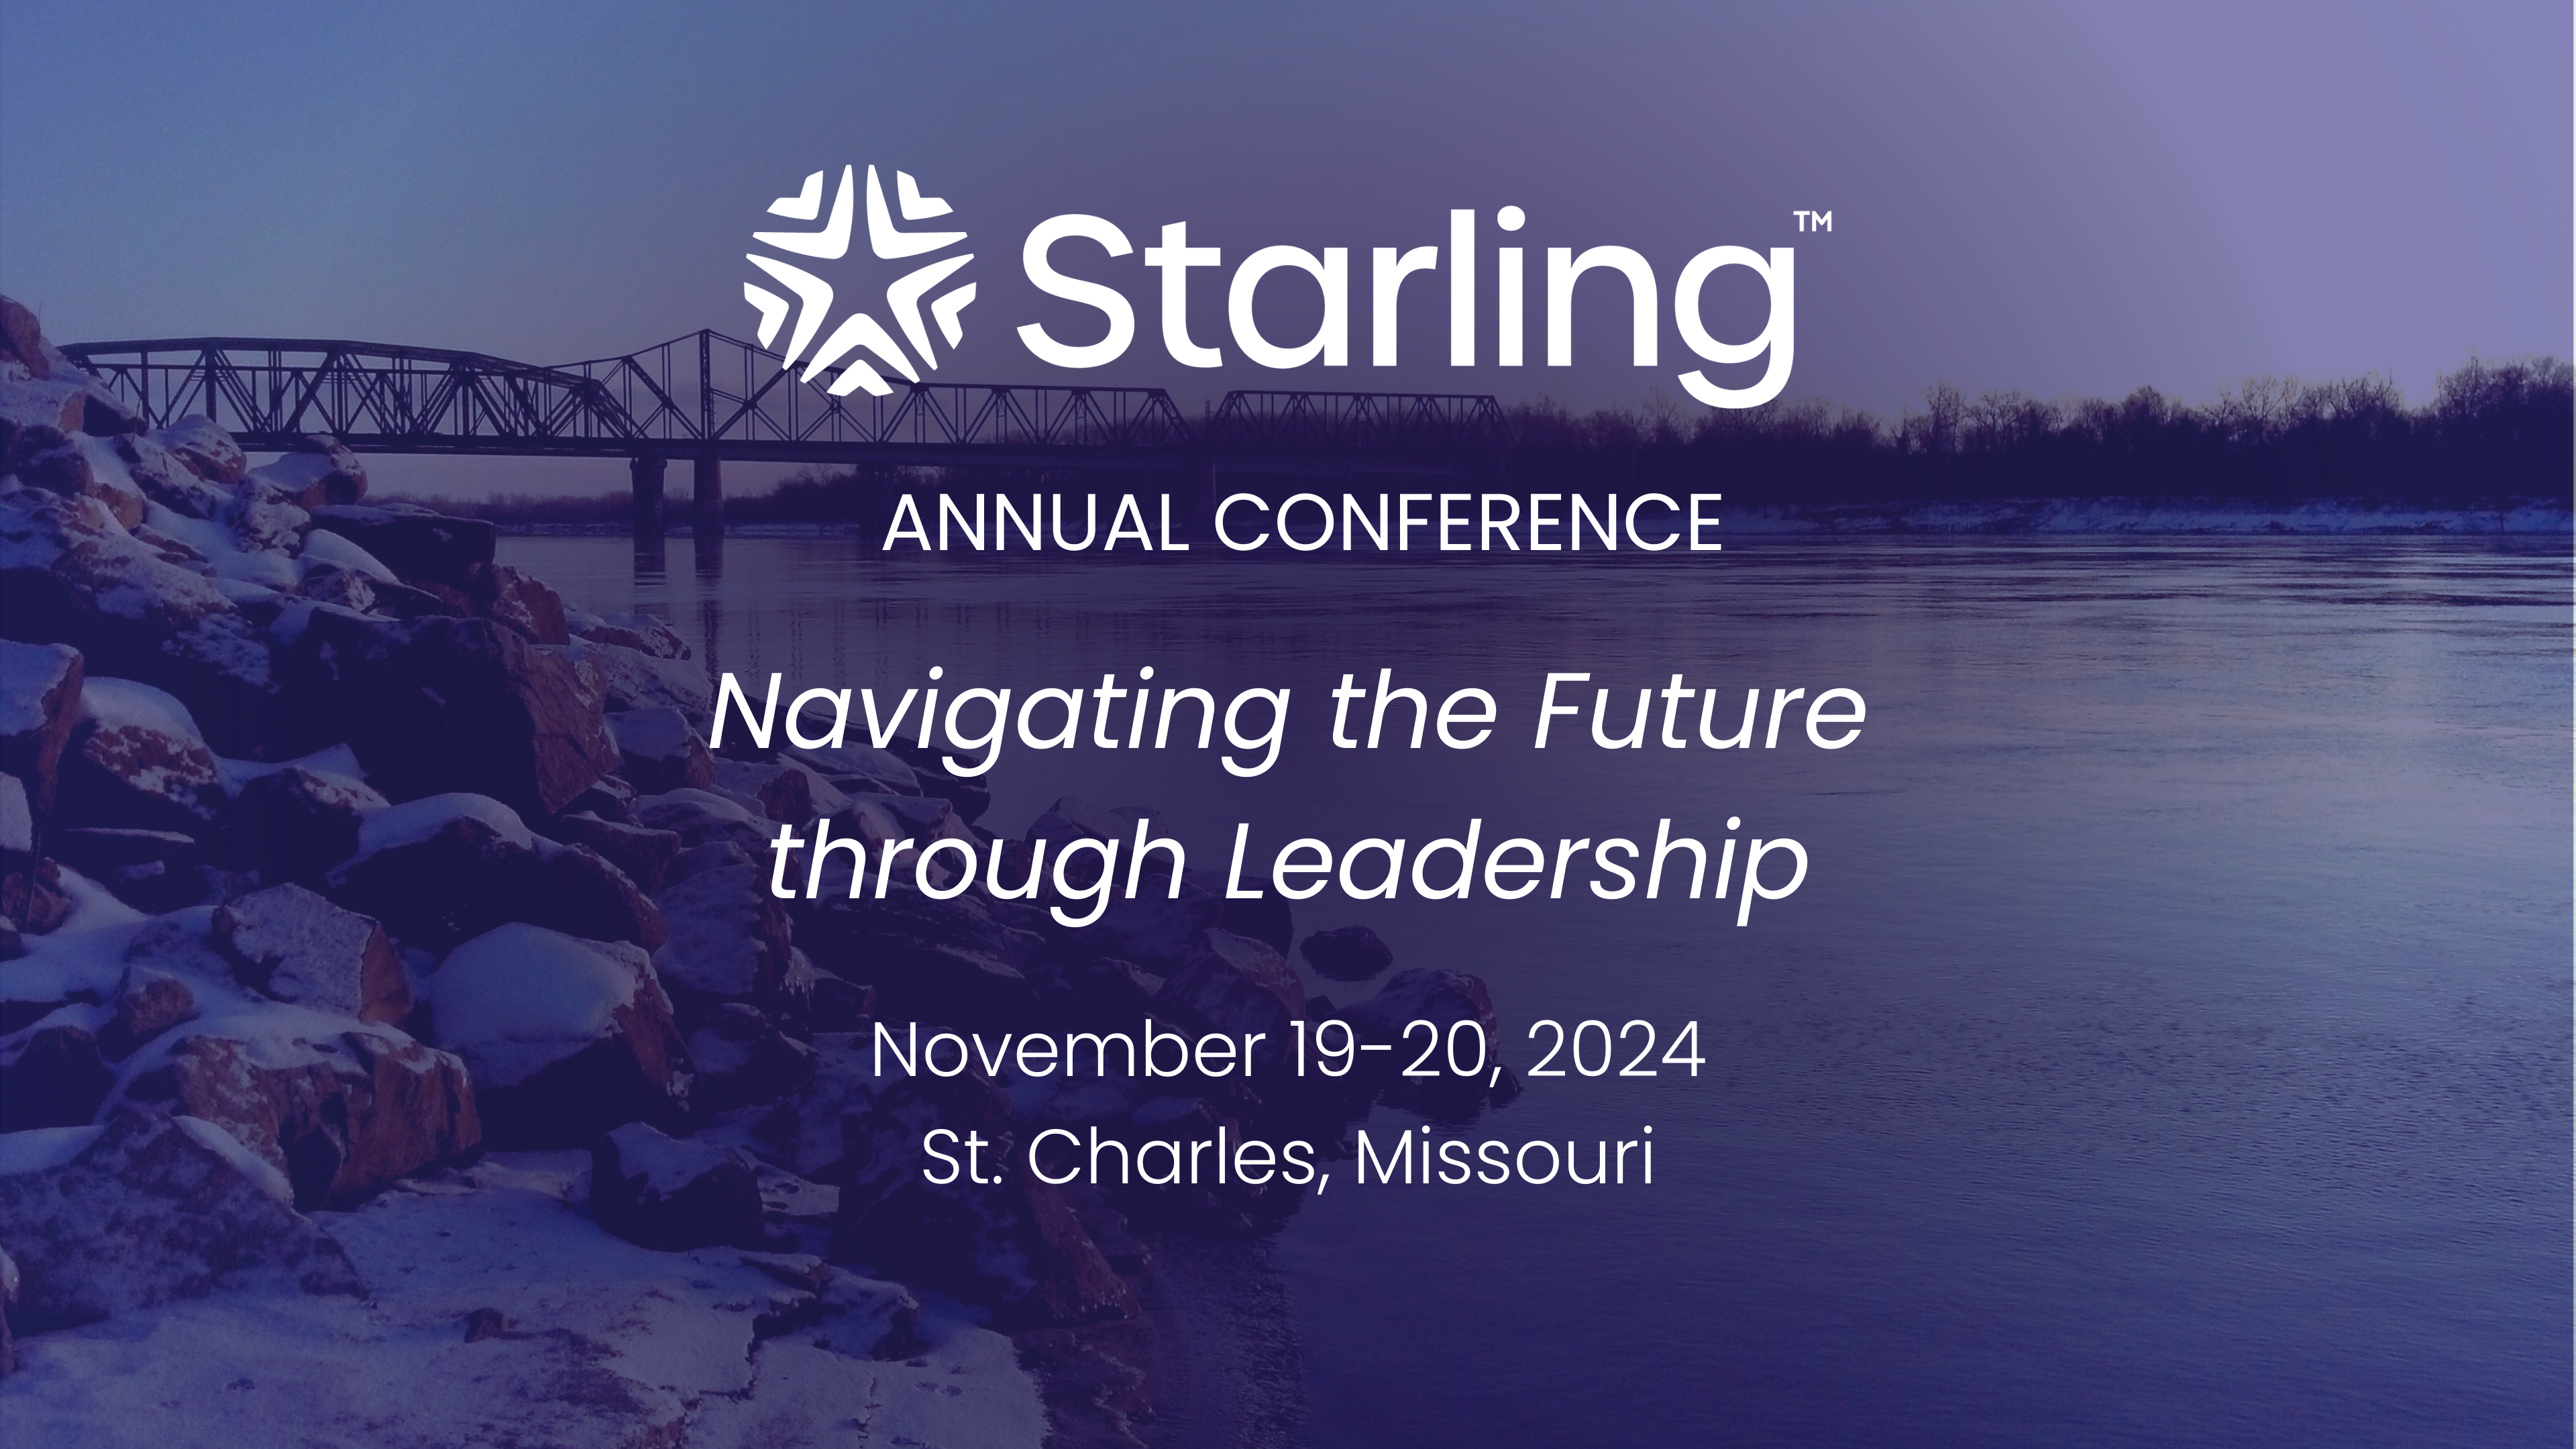 Starling Conference 2024